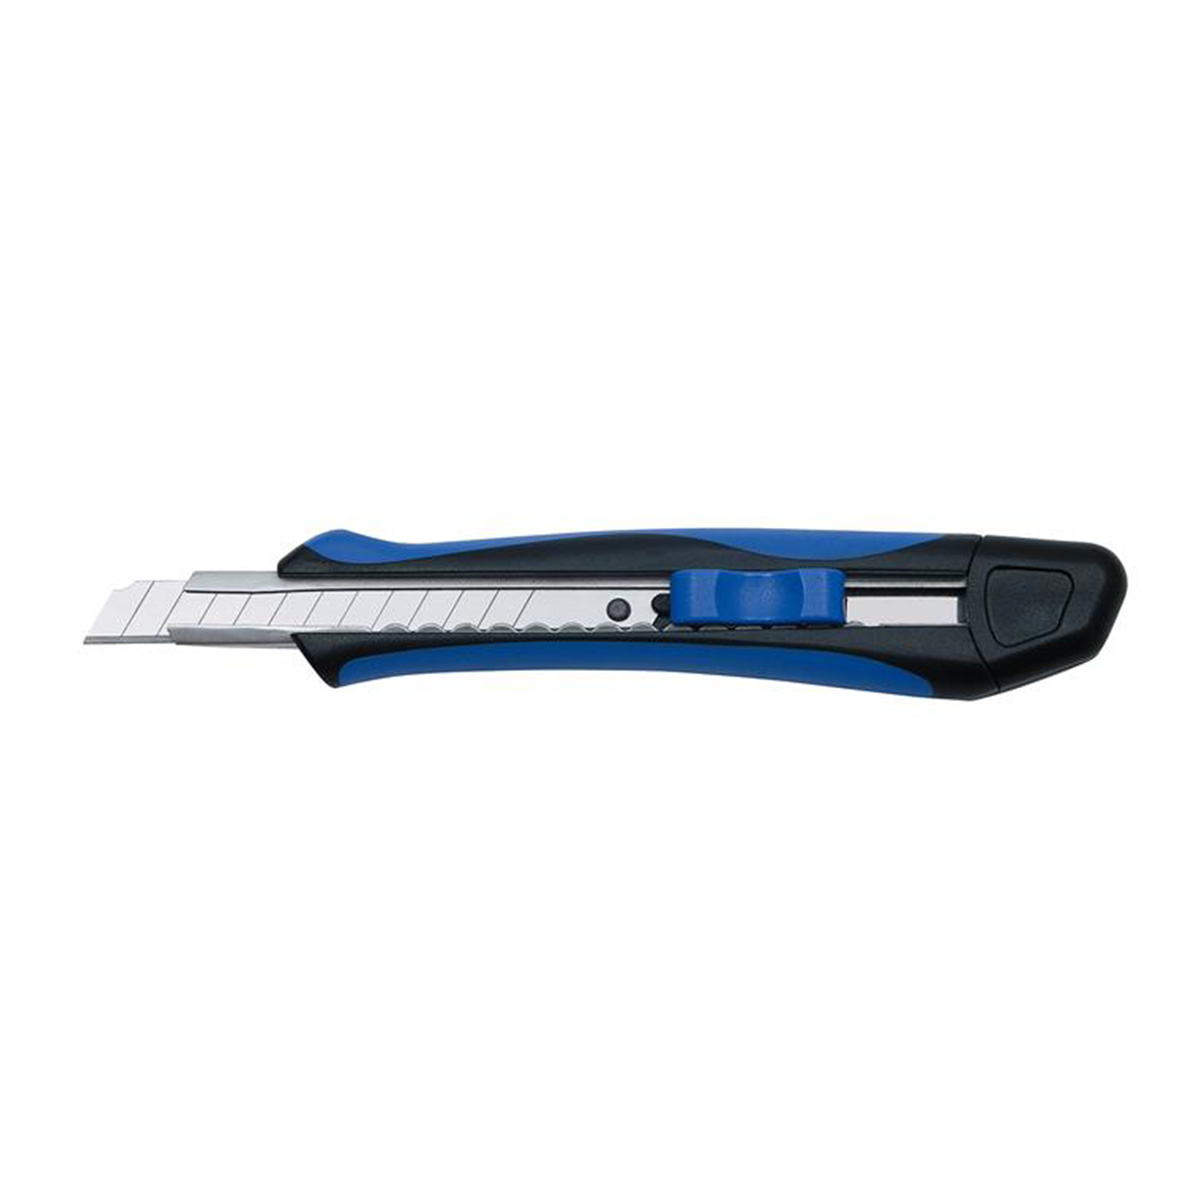 WEDO Cutter knife 9 mm with softgrip - blue/black